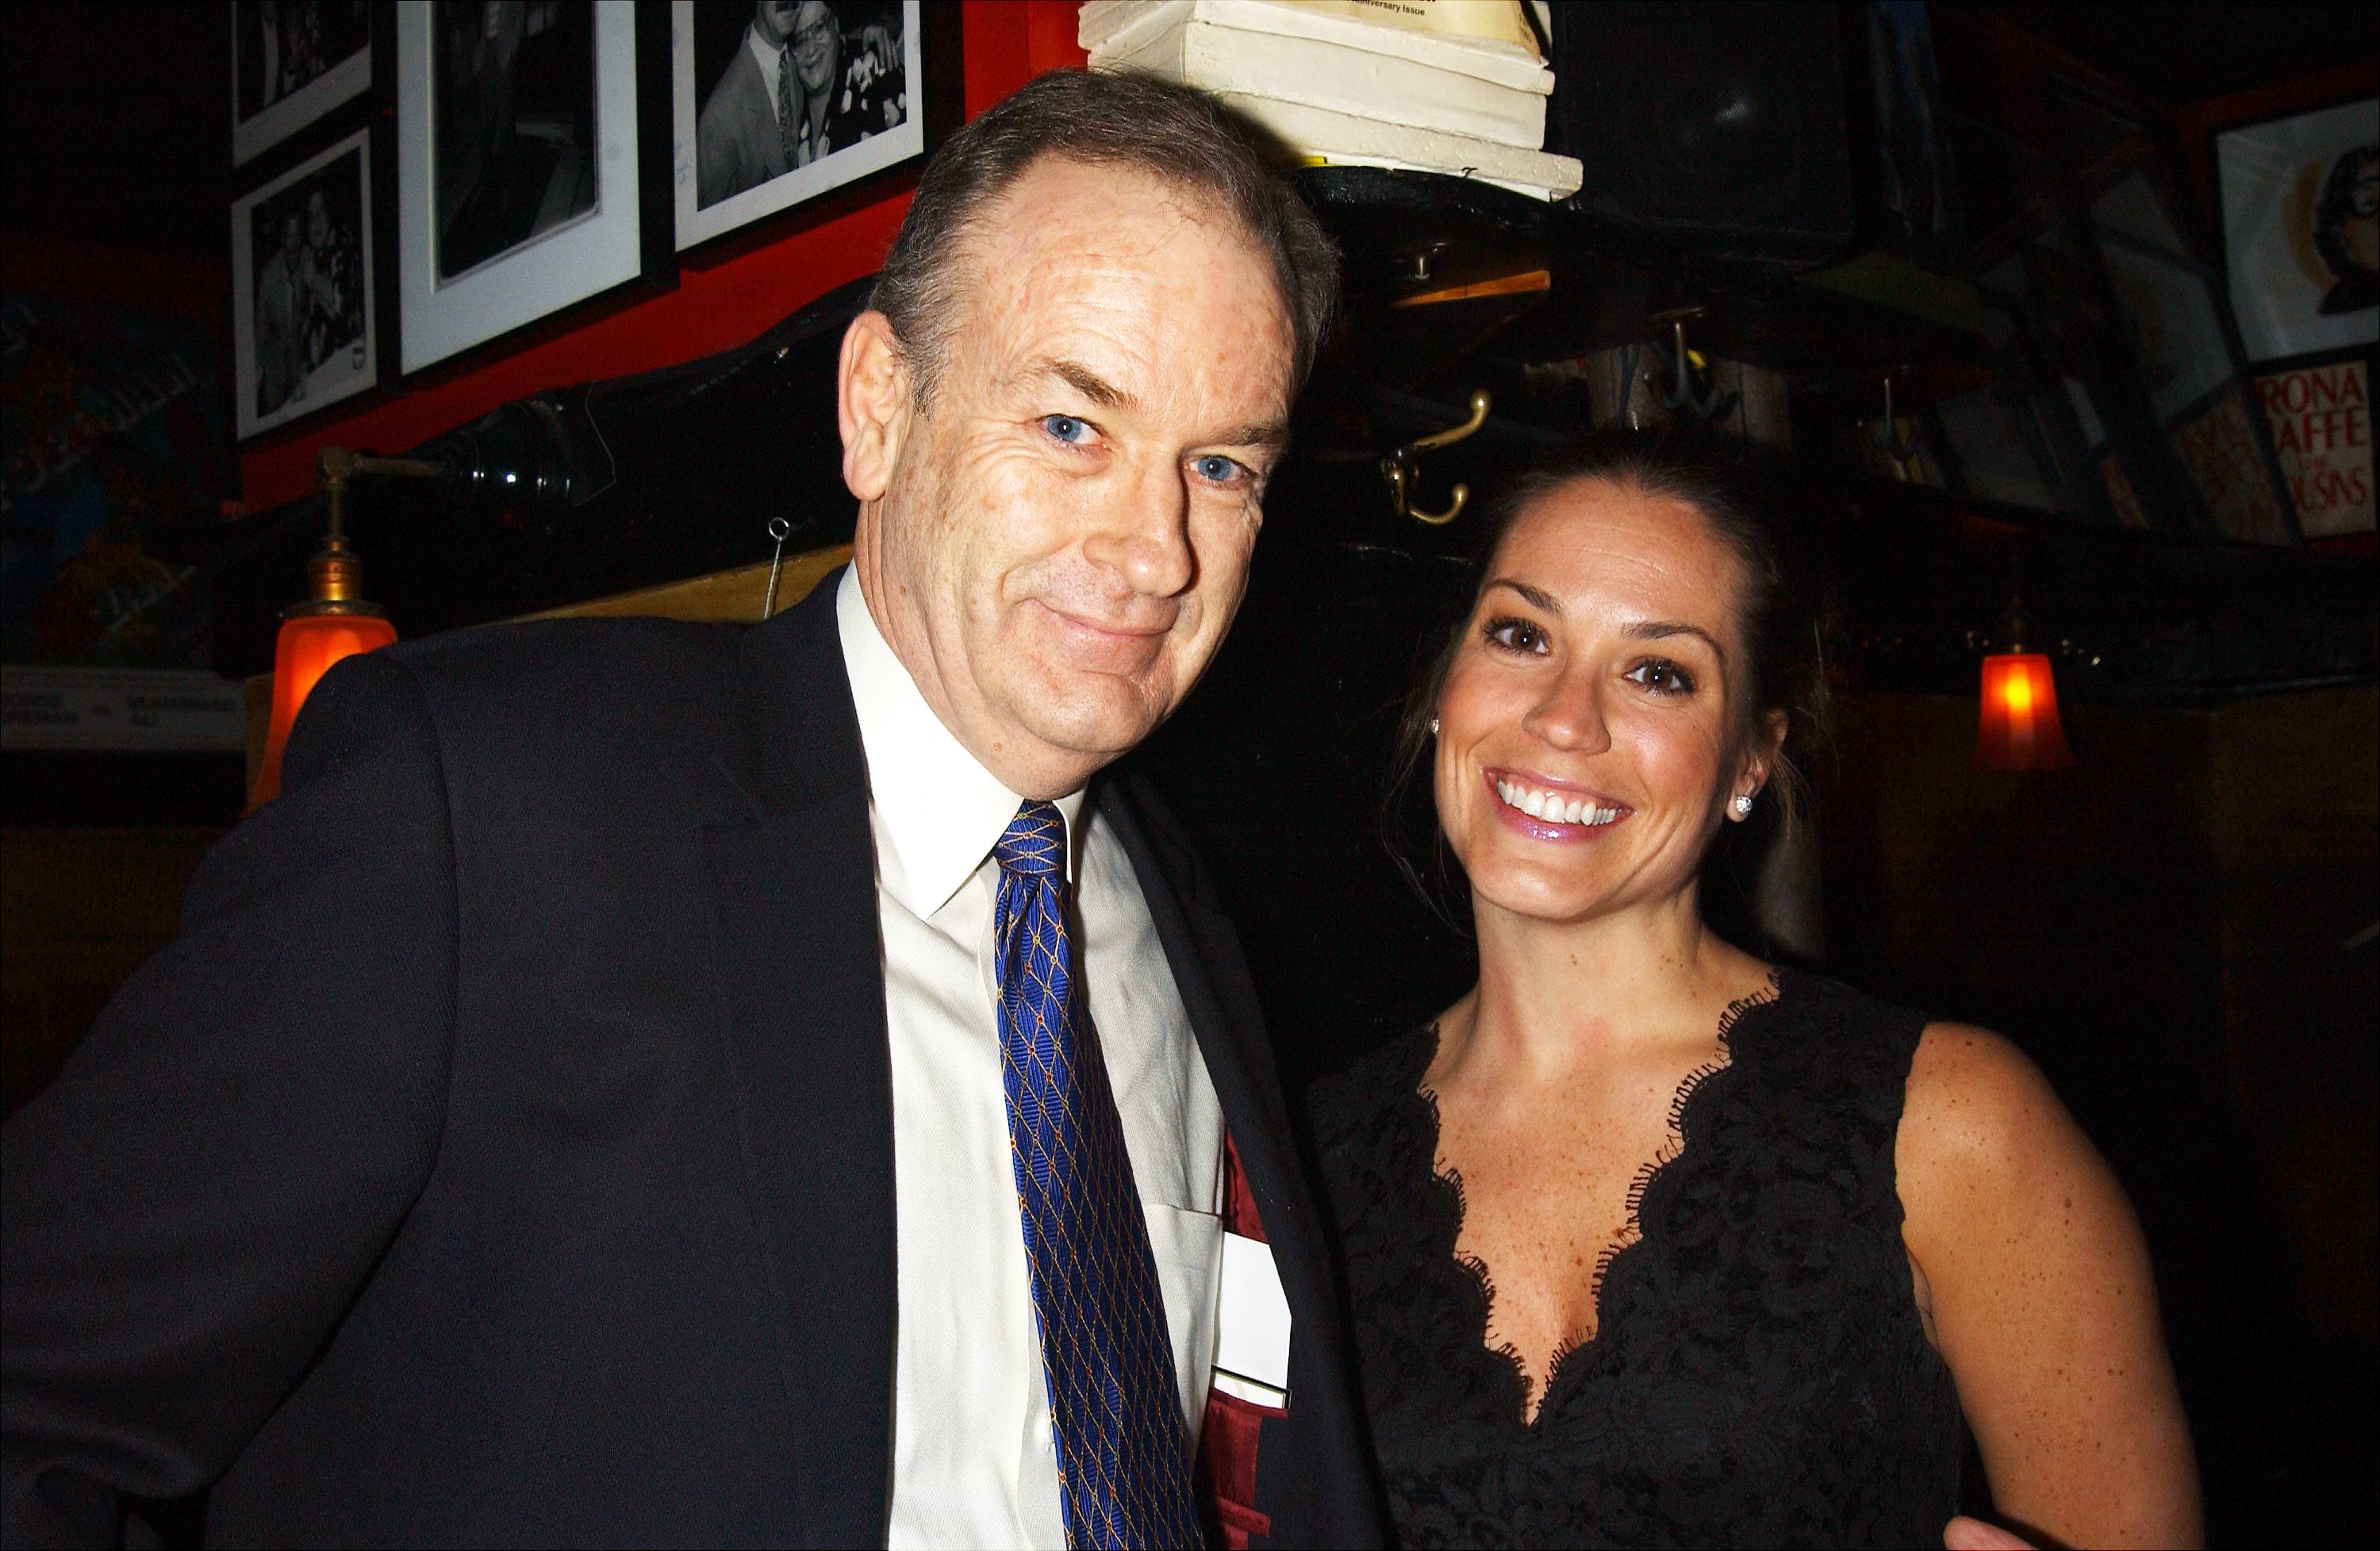 Bill O'Reilly's ExWife Says He Dragged Her Down a Flight of Stairs by